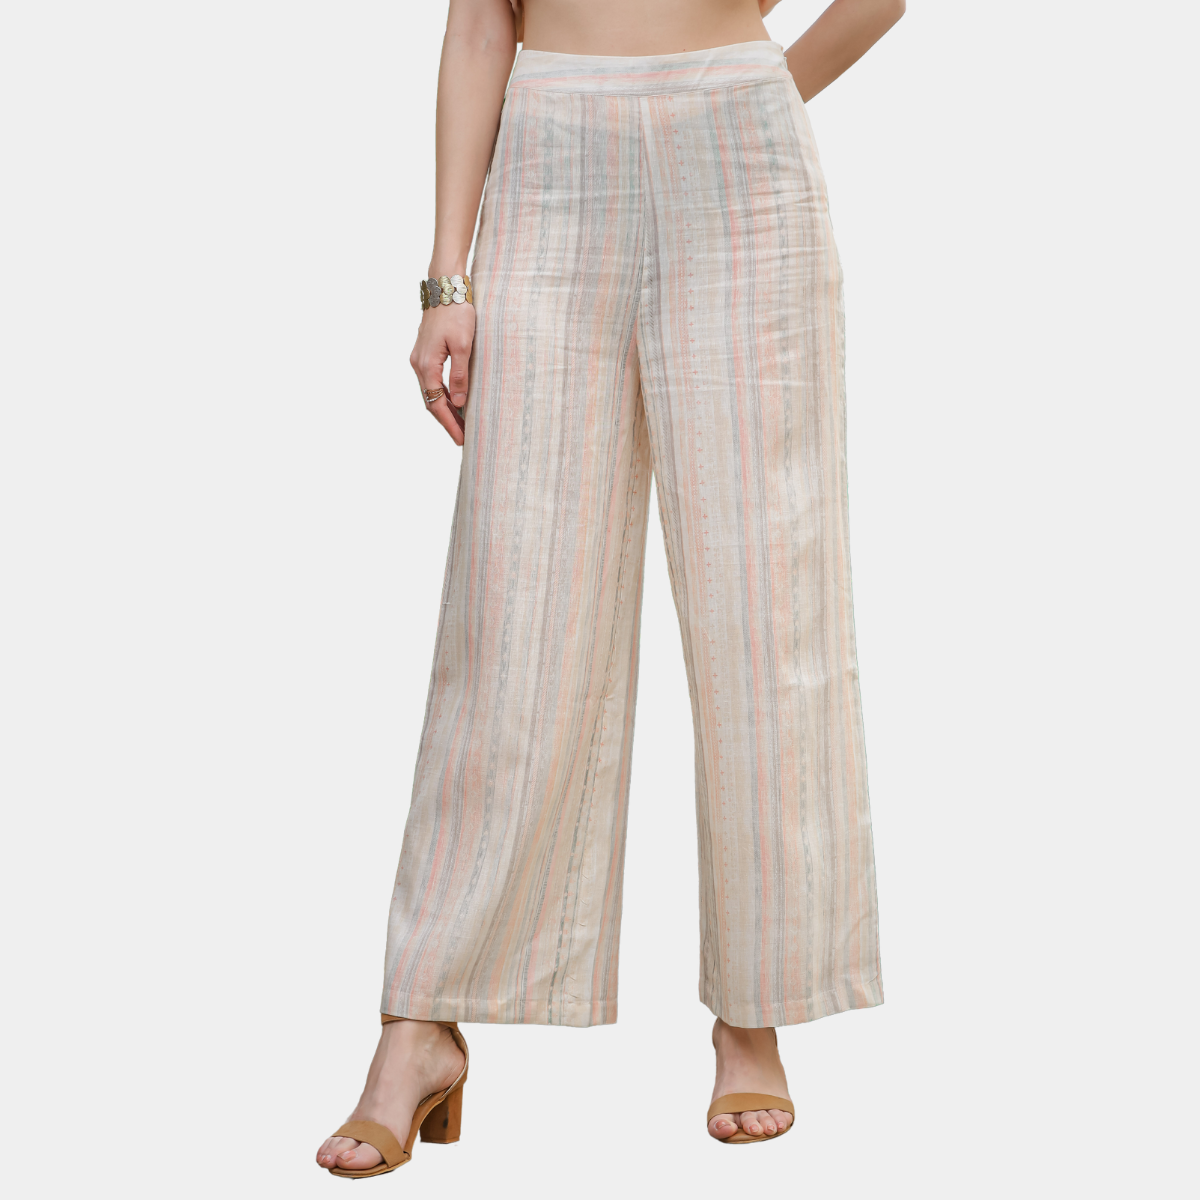 Off White Cotton Linen Tie UP Pant  Expressions by UV